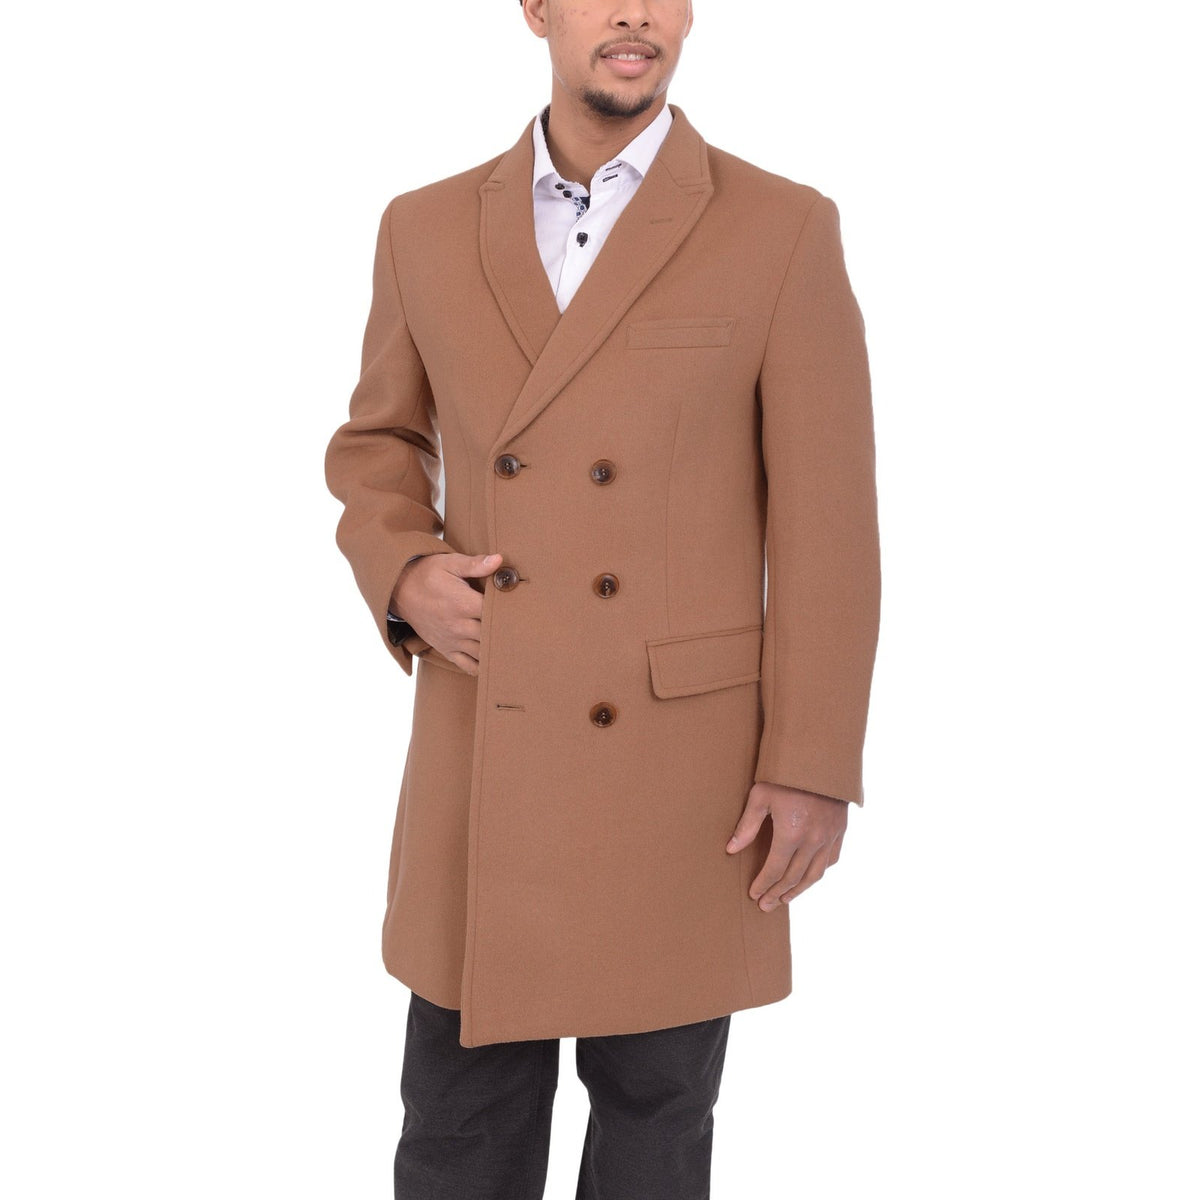 Mens Camel Tan 3/4 Length Double Breasted Wool Cashmere Overcoat Car Coat